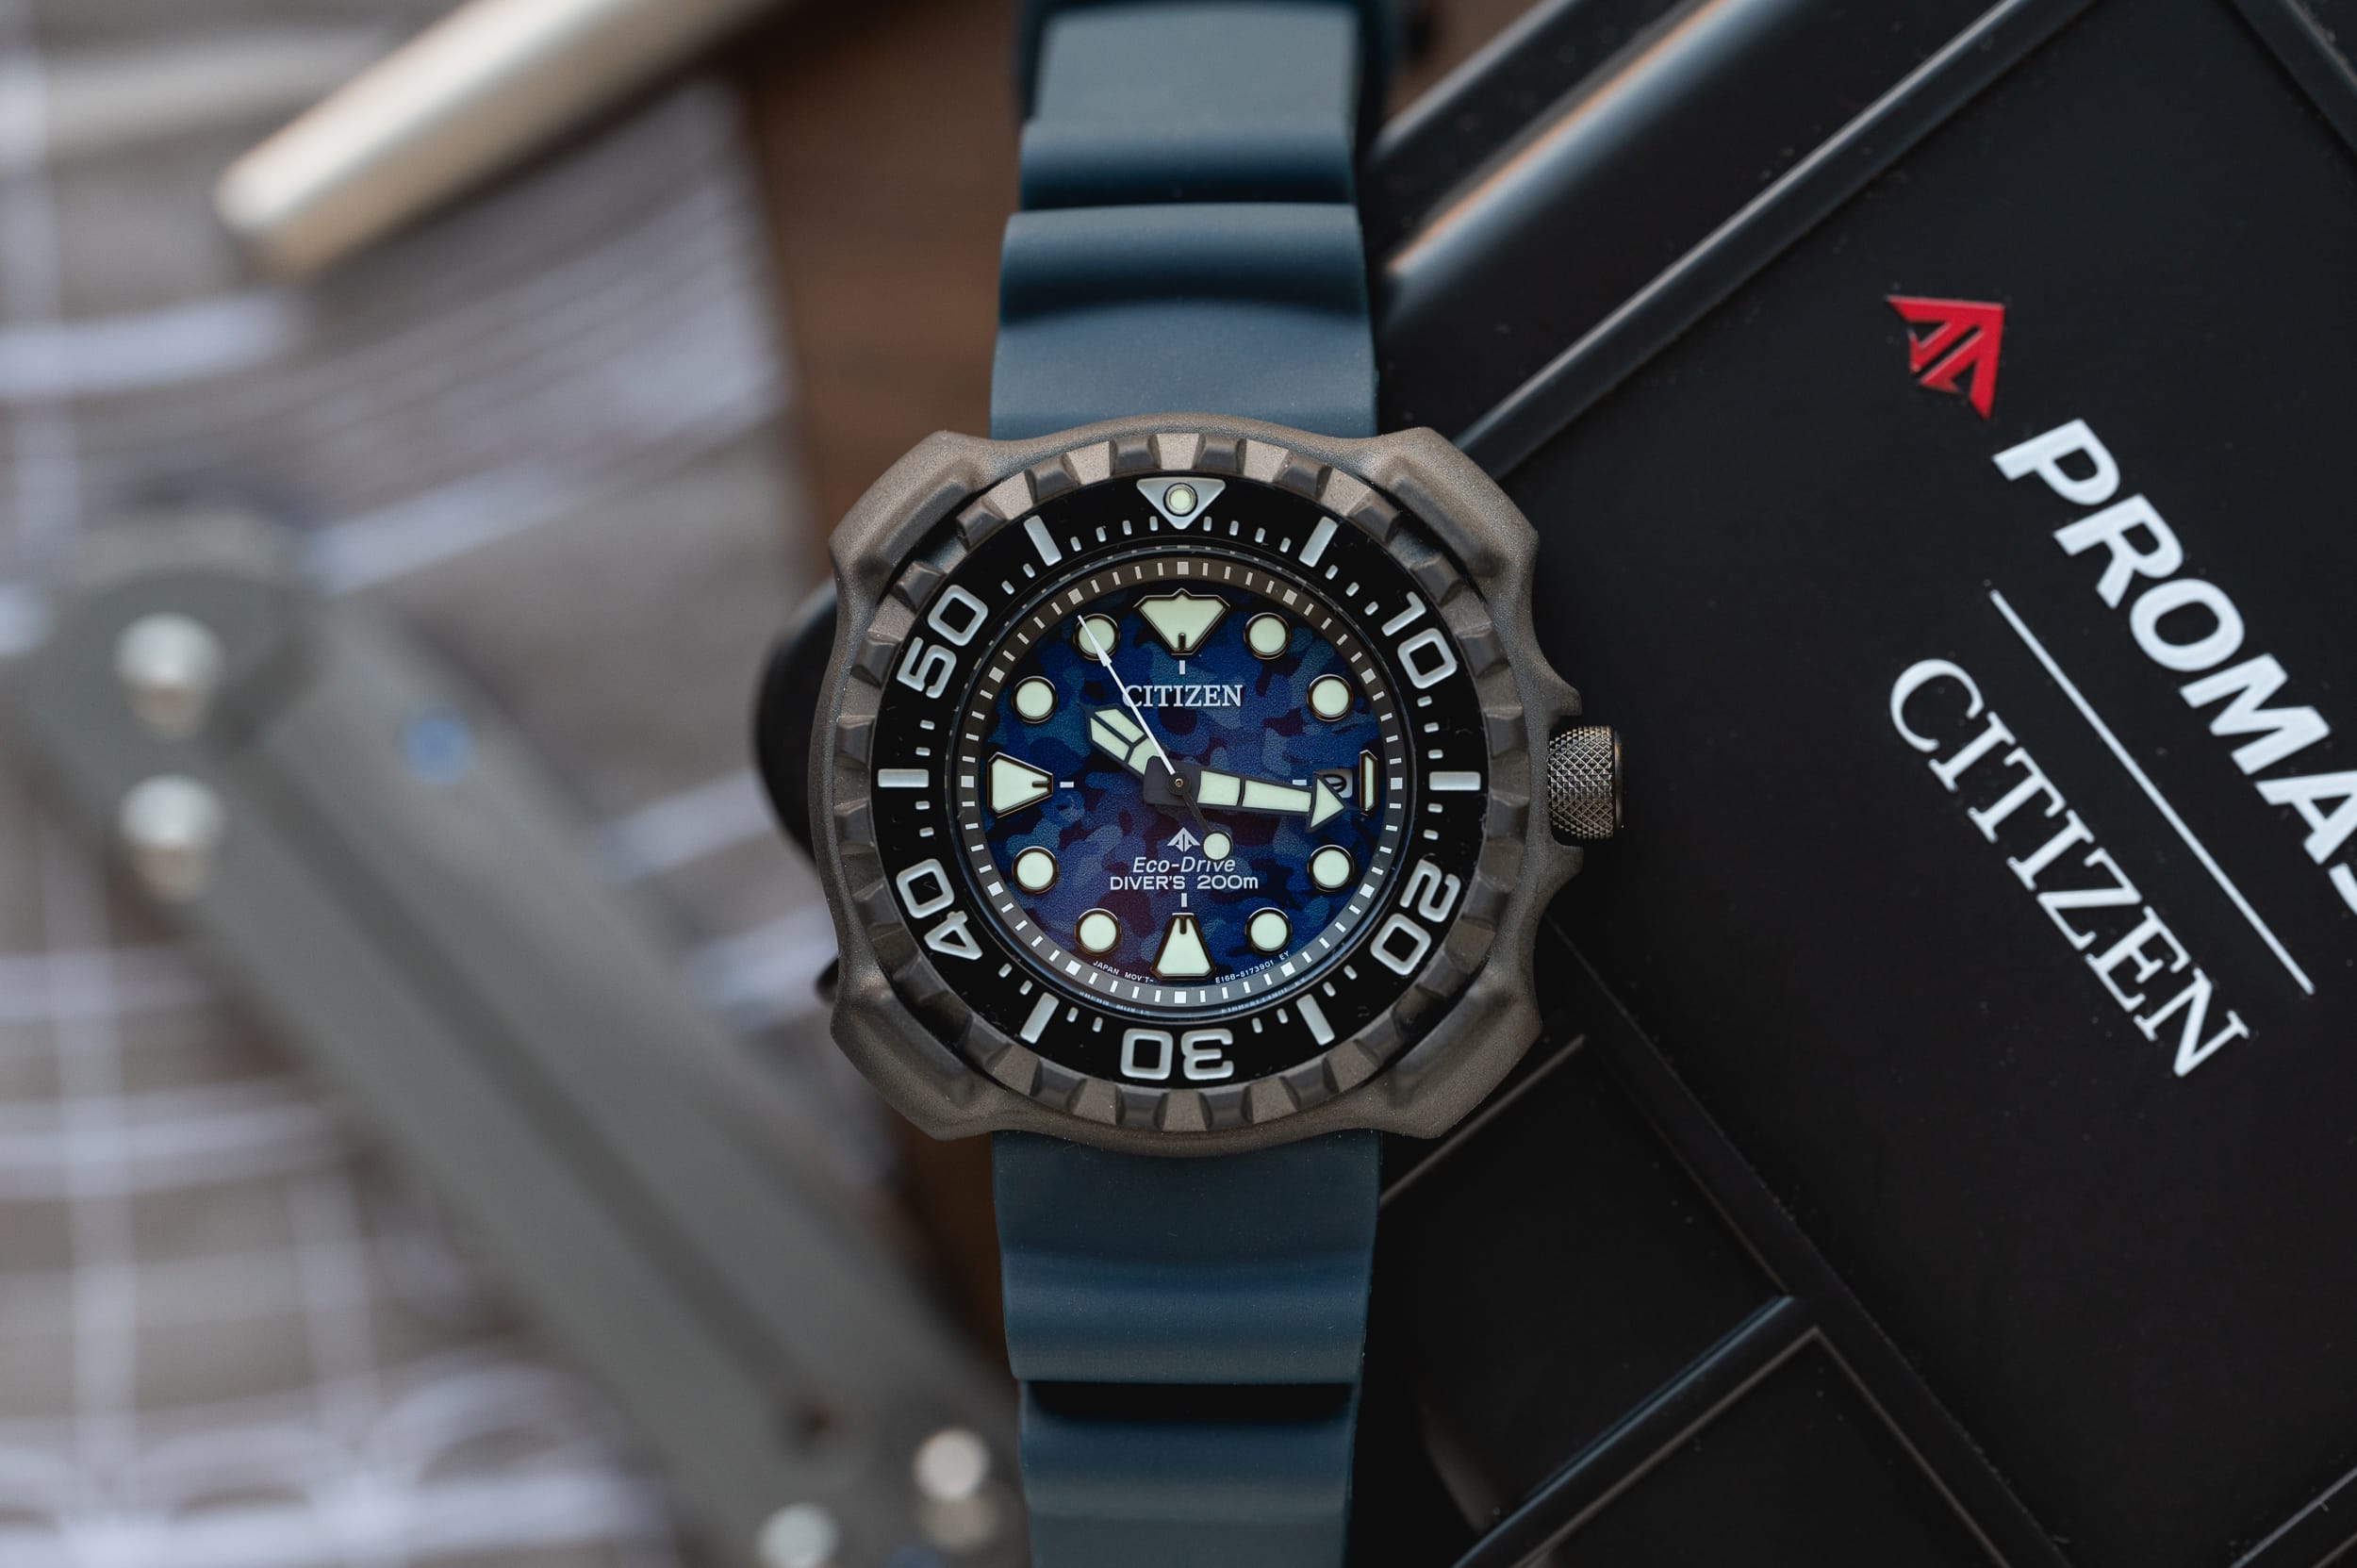 Owner?s Reflections On The Wild Citizen Promaster Dive BN0227